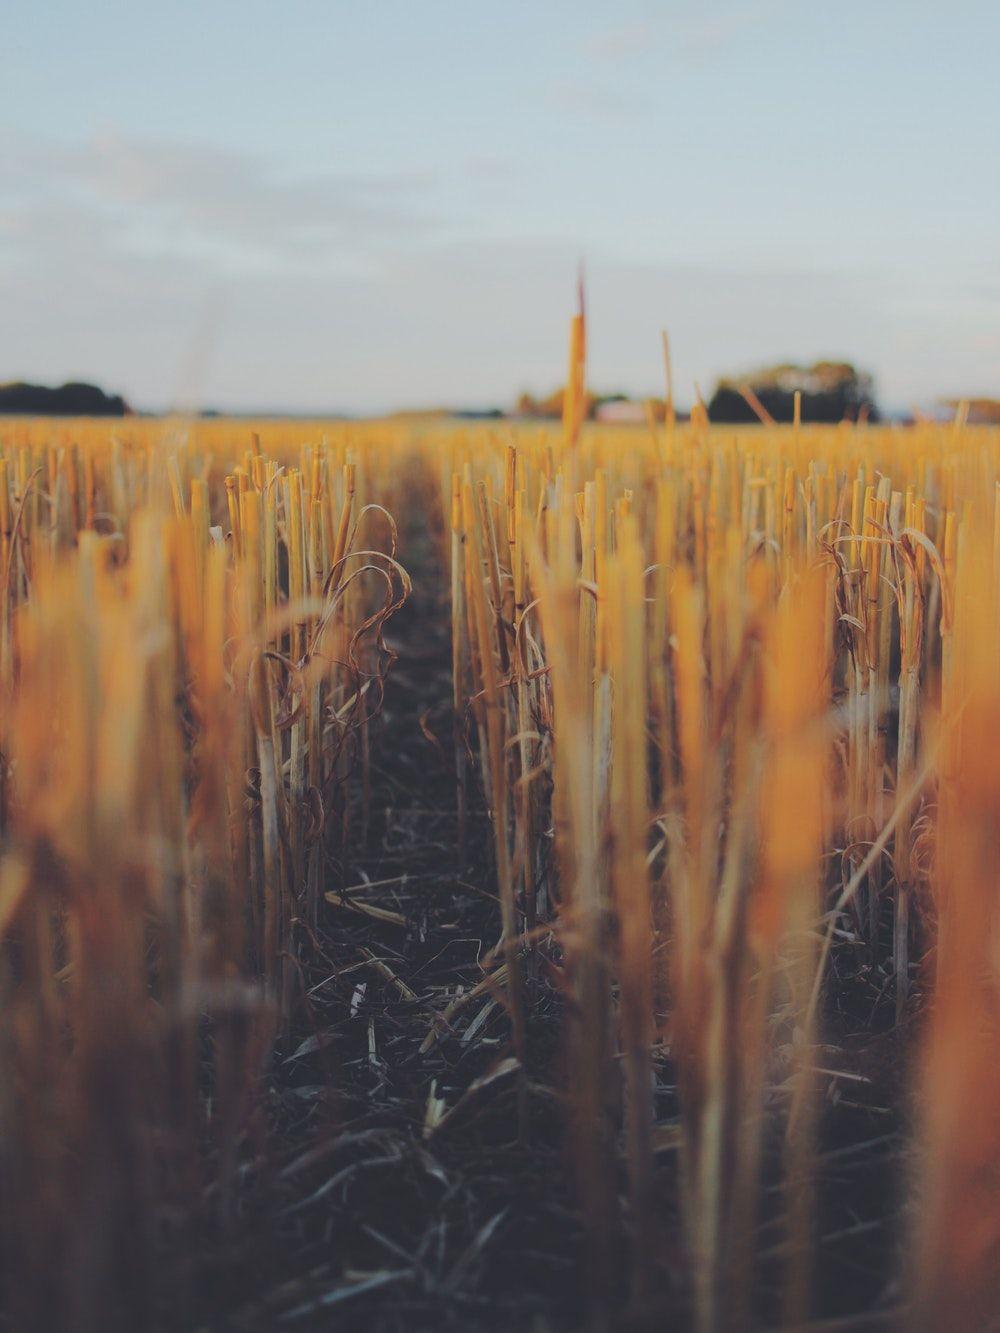 Wheat Field Picture. Download Free Image